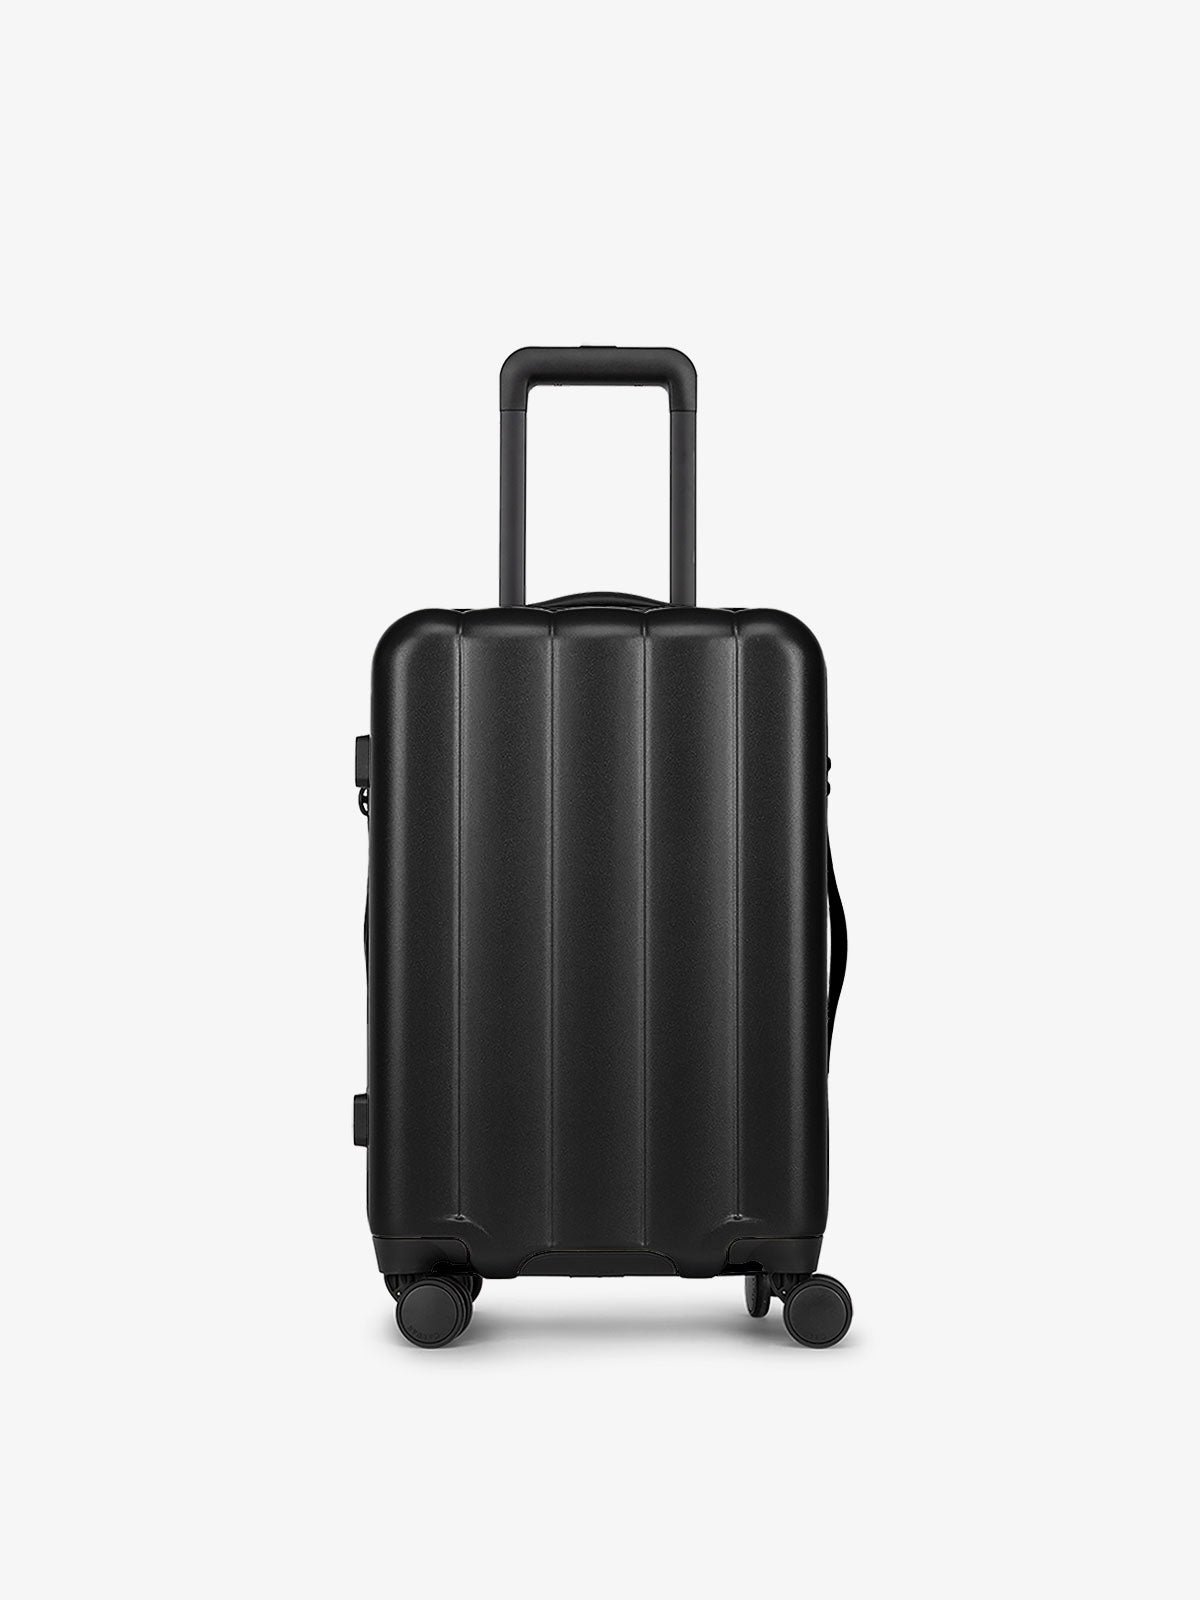 Black carry-on luggage made from an ultra-durable polycarbonate shell and expandable by up to 2"; LCO1020-BLACK